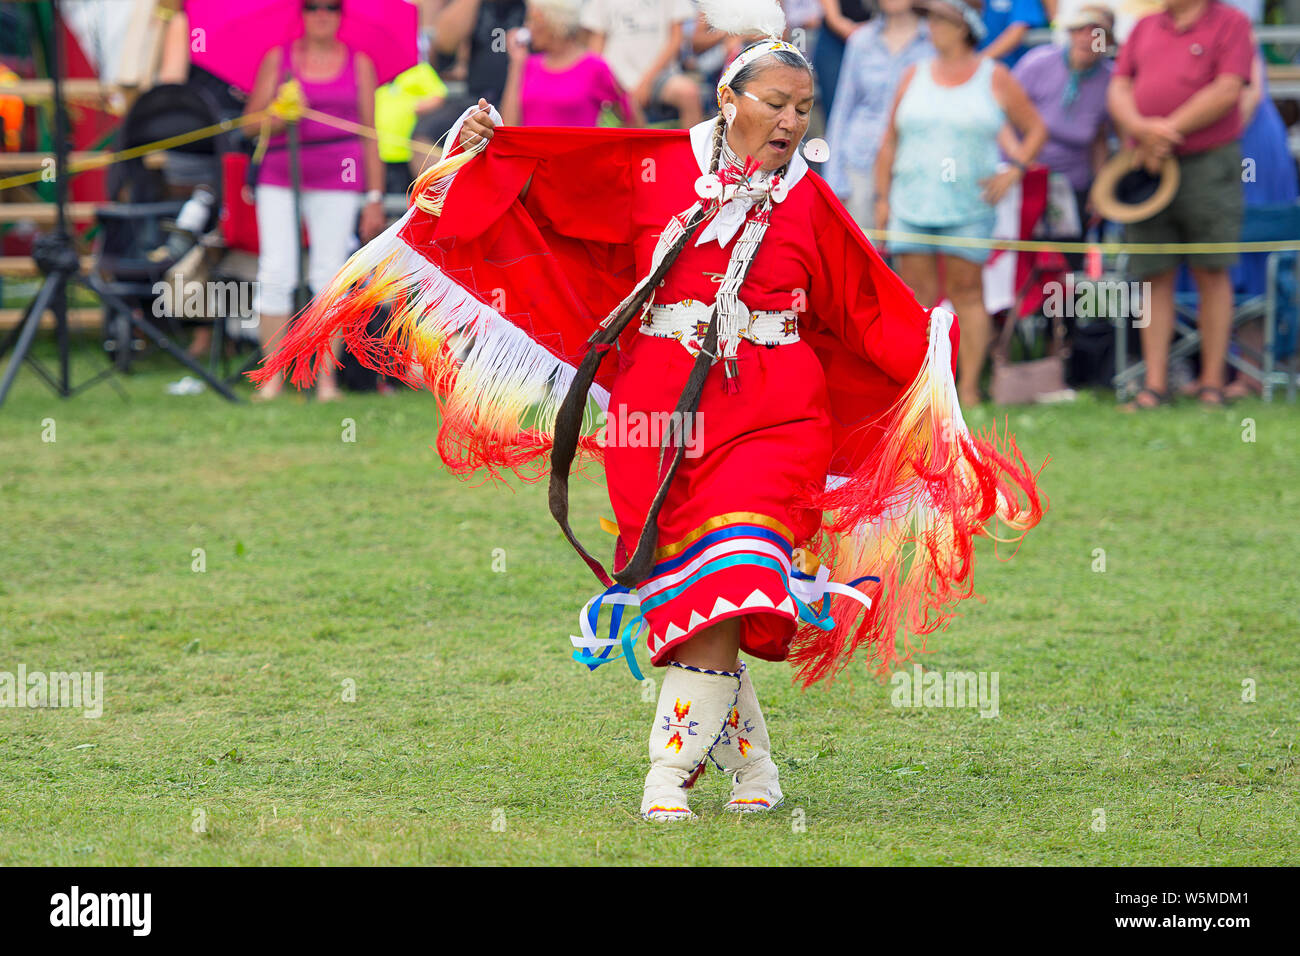 Pow wow Native Female, Elder Woman, Dancer in Traditional Regalia Six Nations of the Grand River Champion of Champions Powwow, Ohsweken Canada Stock Photo